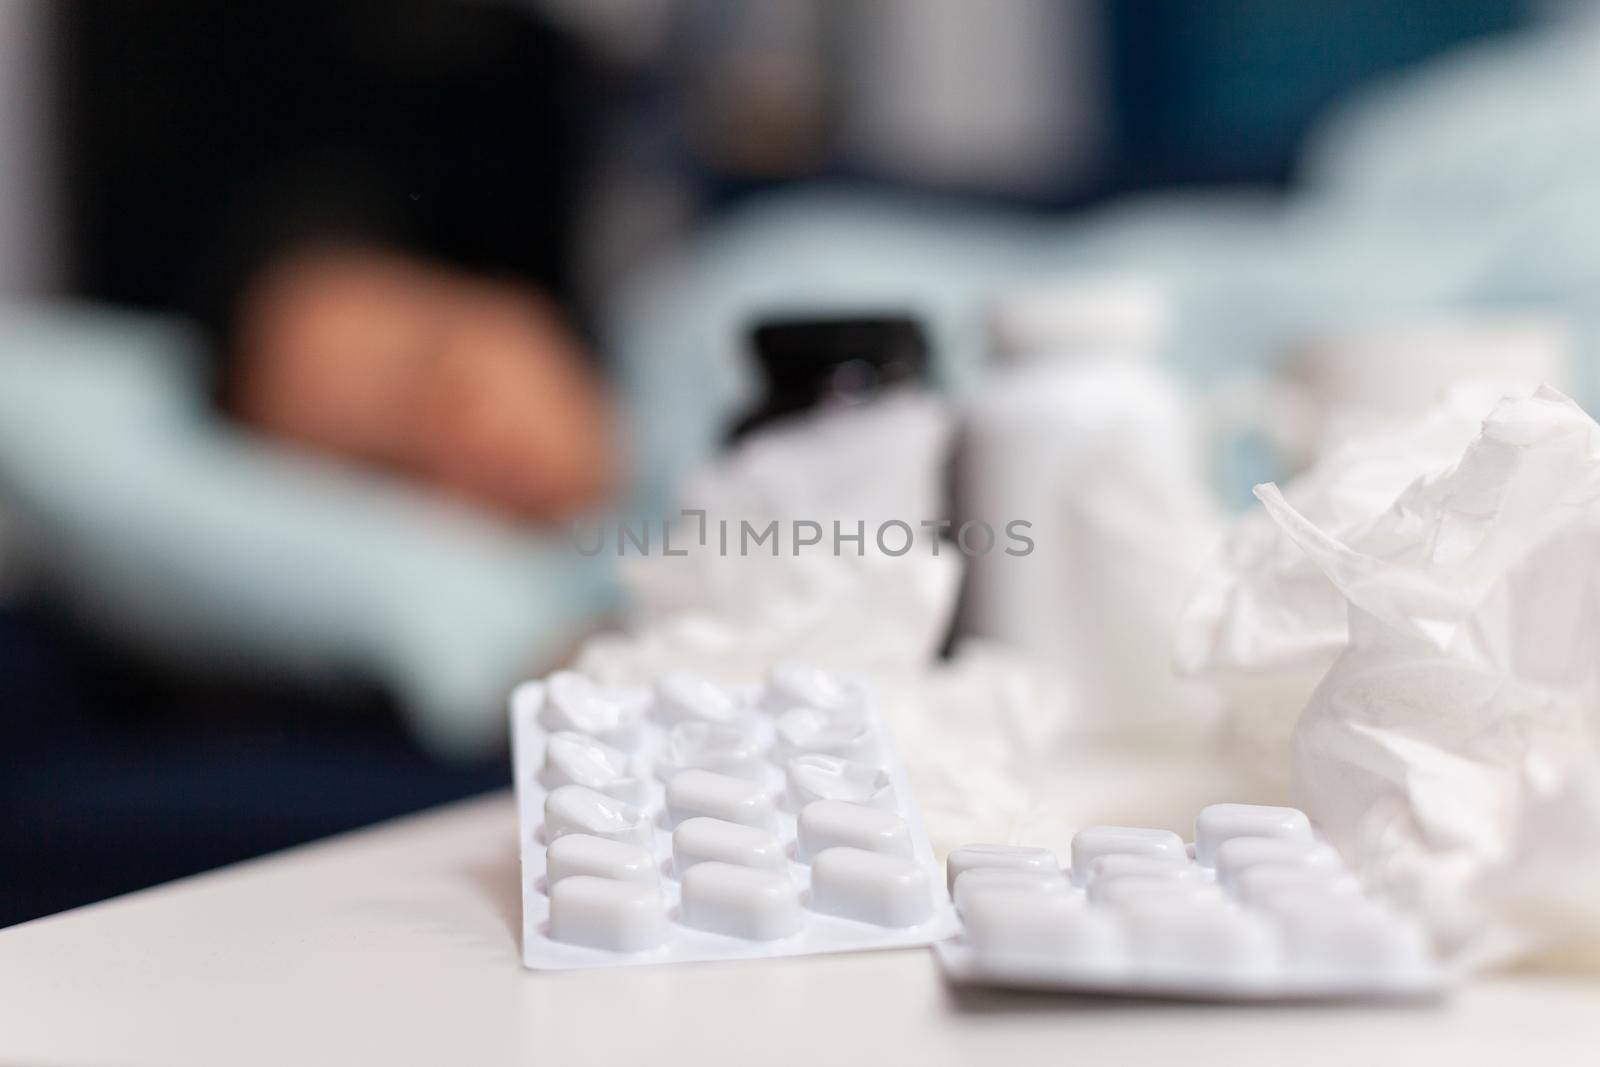 Close up of pills and napkins for ill sick woman resting on the sofa at home. Taking medicine for cold and flu, fever, seasonal virus symptoms. Bottles with drugs for recovery treatment